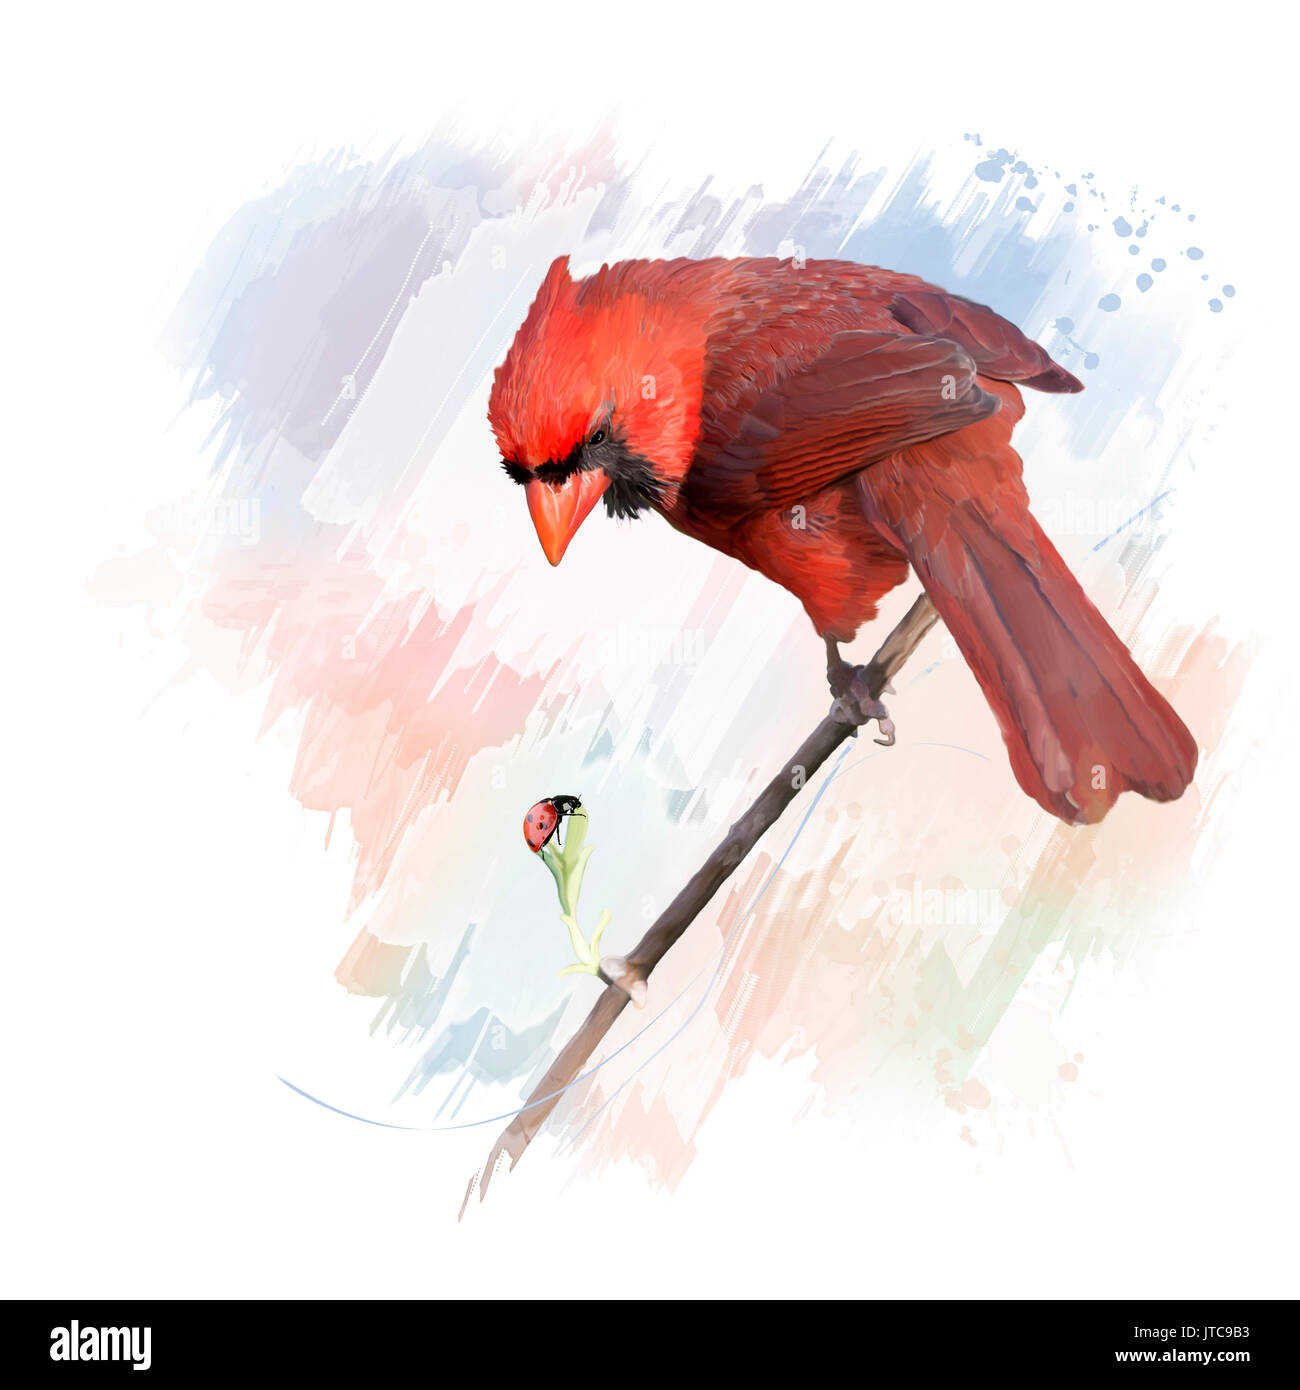 Northern Cardinal Bird Illustration High Resolution Stock Photography And Images Alamy